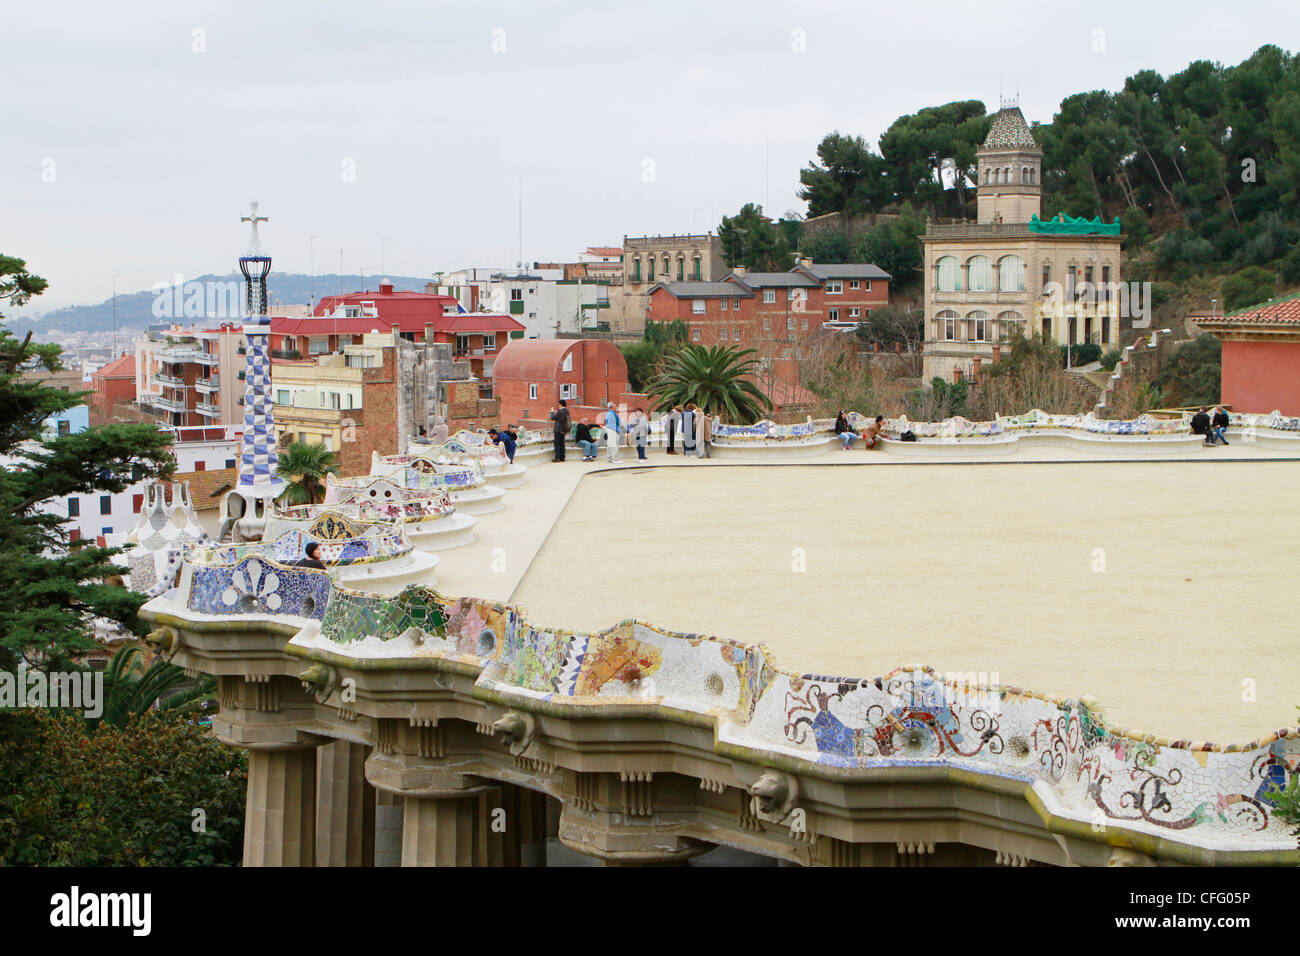 Barcelona, Spain - February 27, 2012: Tourist mill at the ornate viewing deck of Parc Guell in Barcelona (For editorial use) Stock Photo